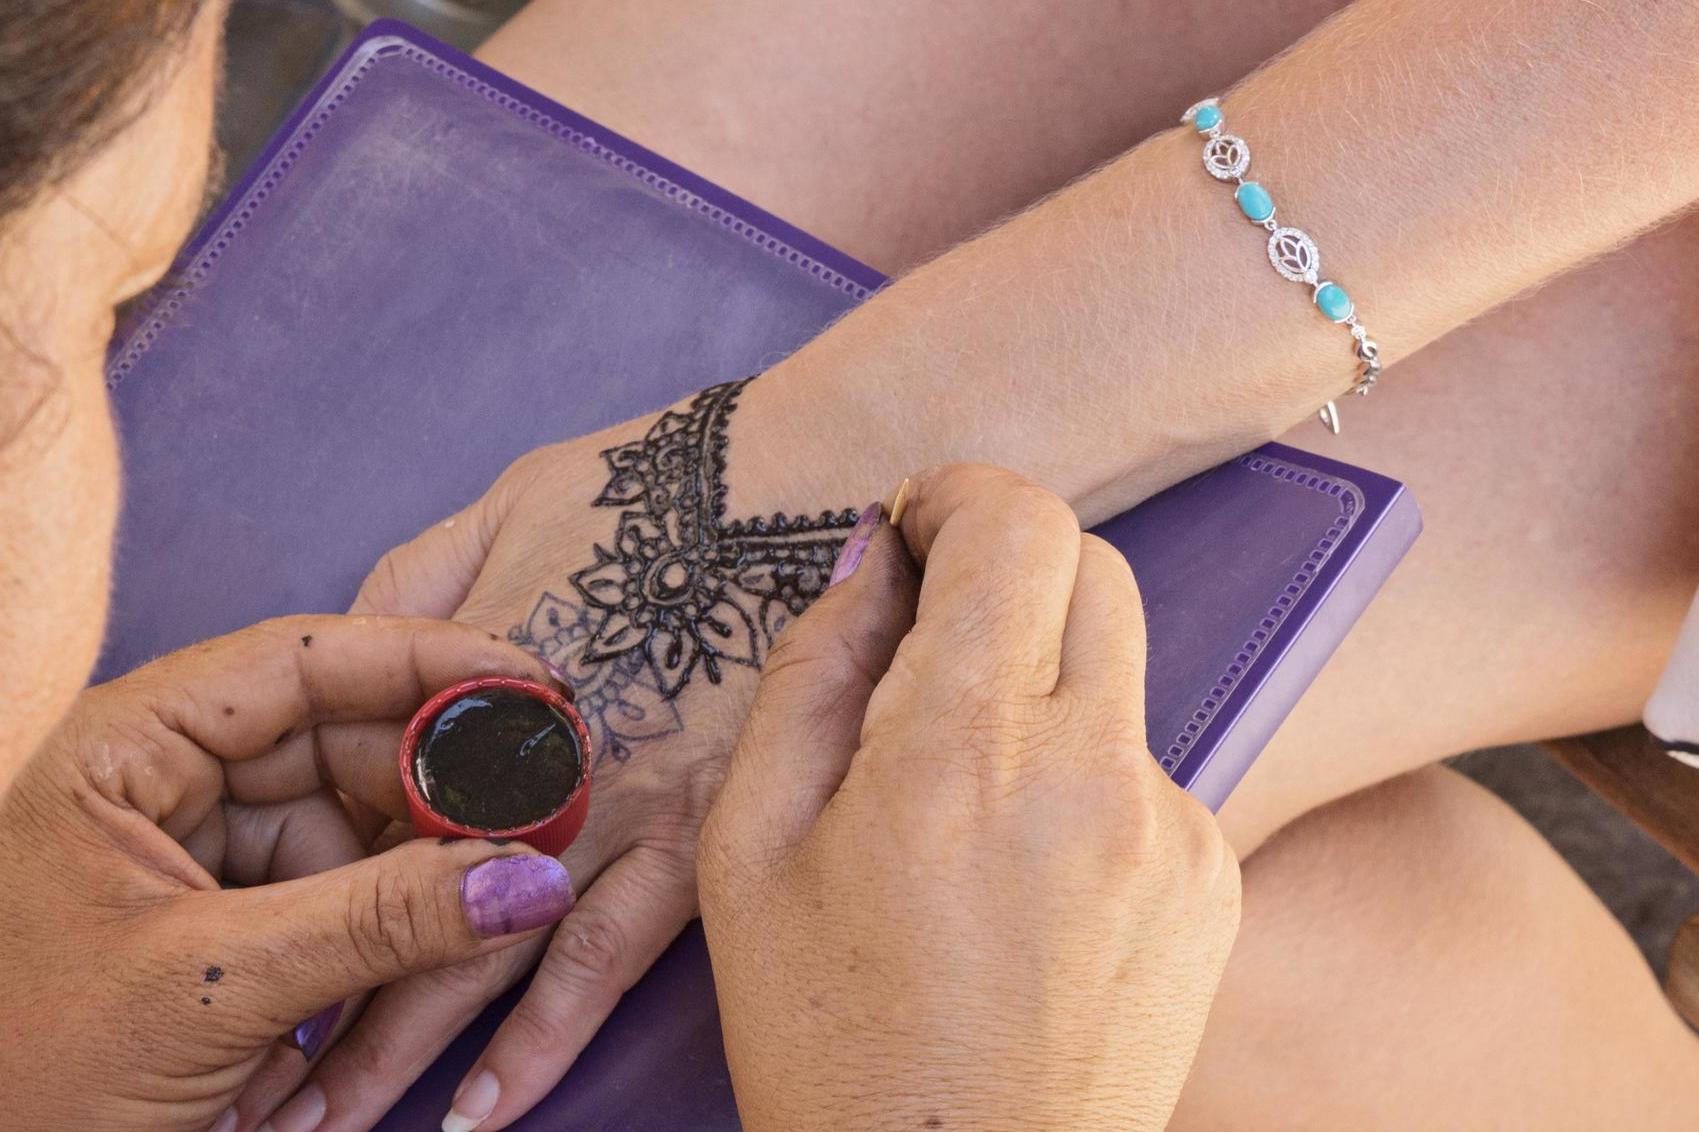 The NHS has warned that black henna could put you at risk of ‘life-threatening allergic reactions’ (Getty)